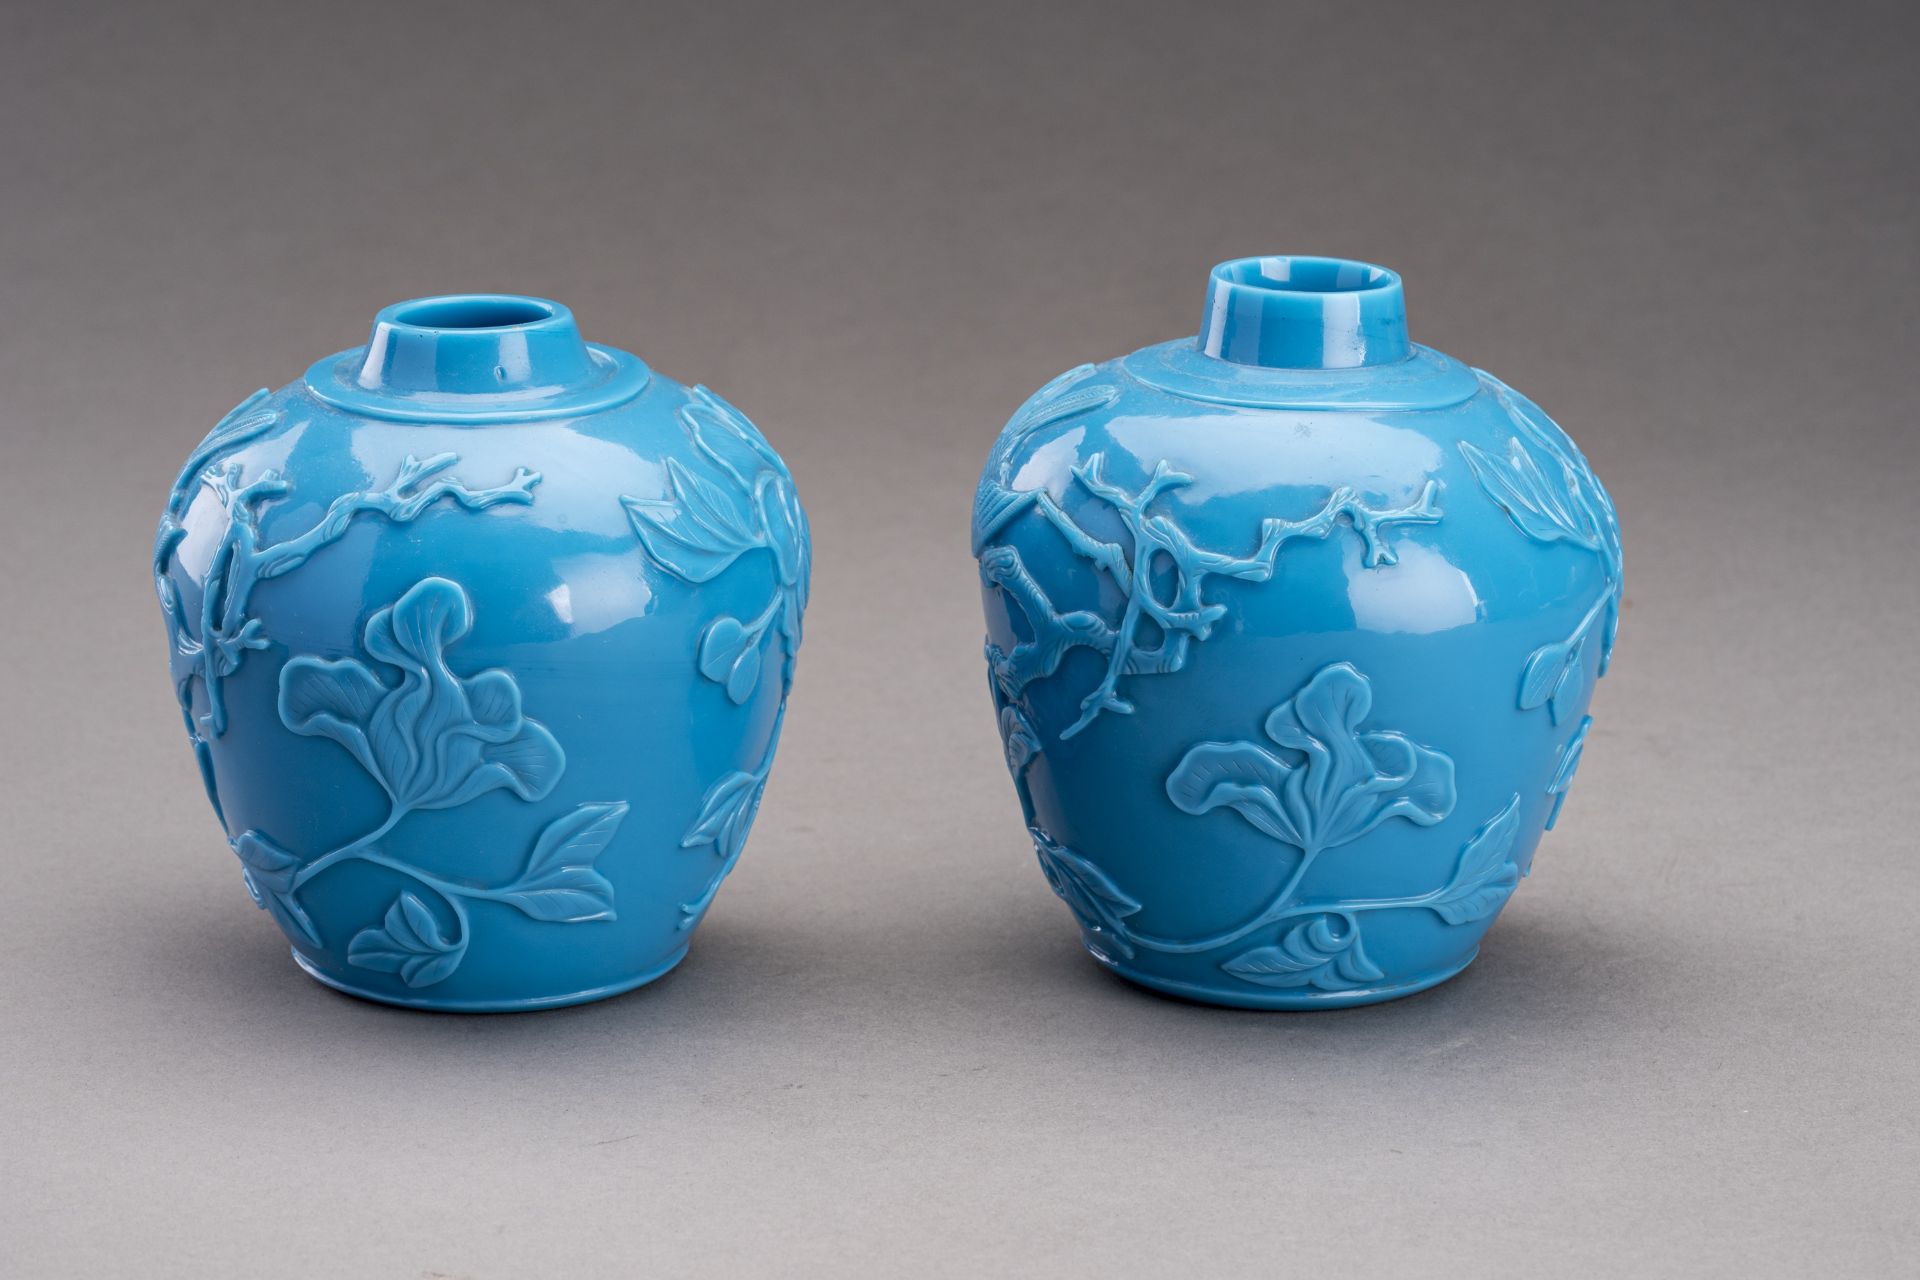 A PAIR OF PEKING GLASS VASES - Image 4 of 6